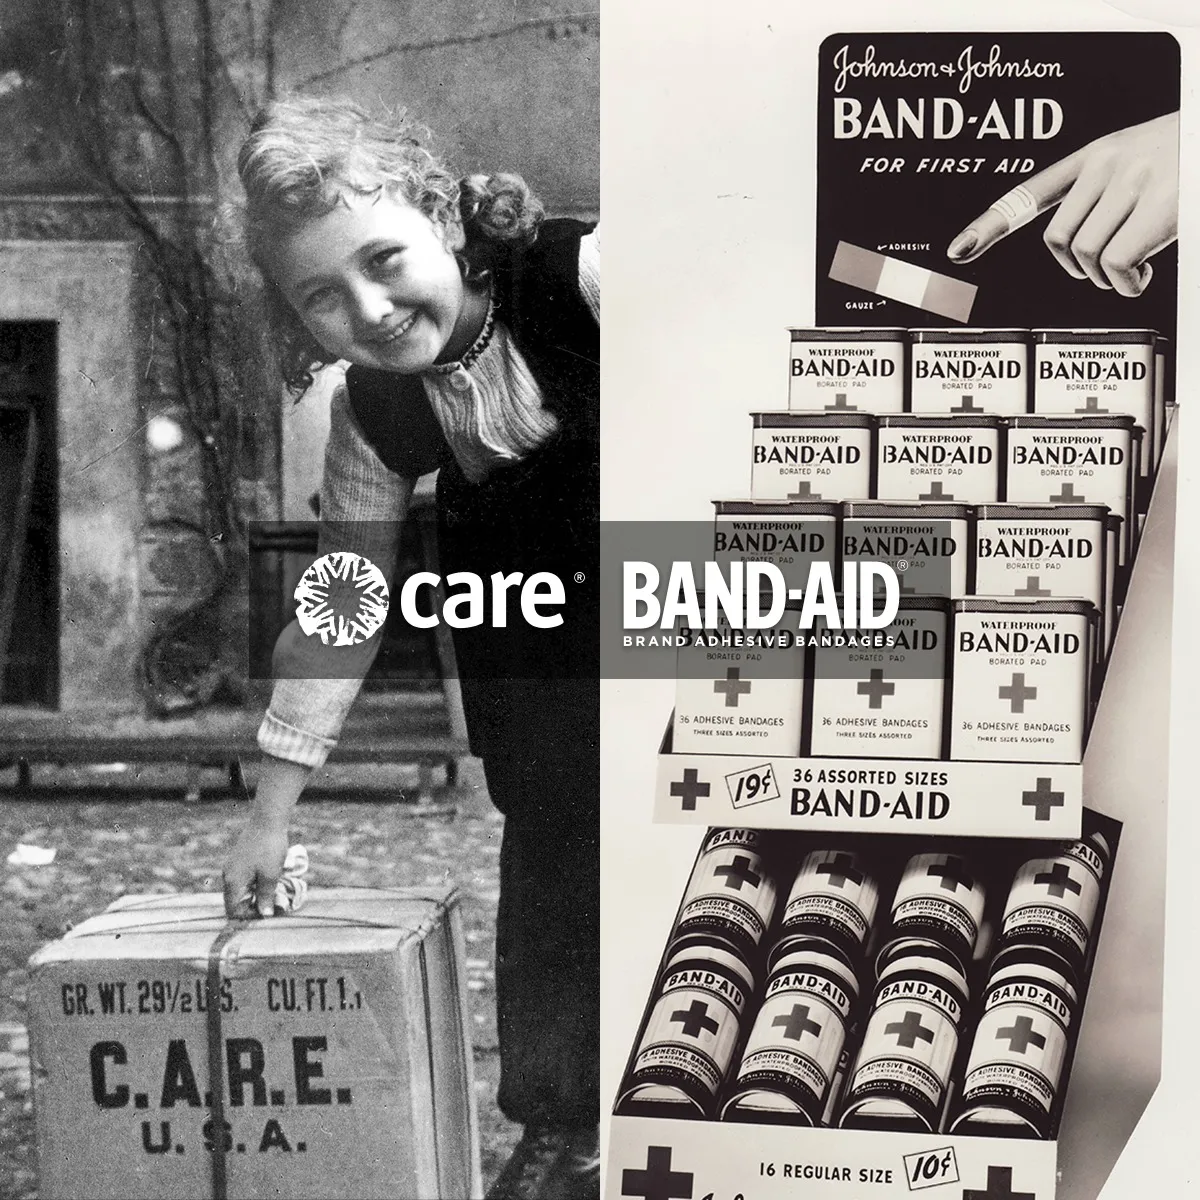 CARE and BAND-AID partnership